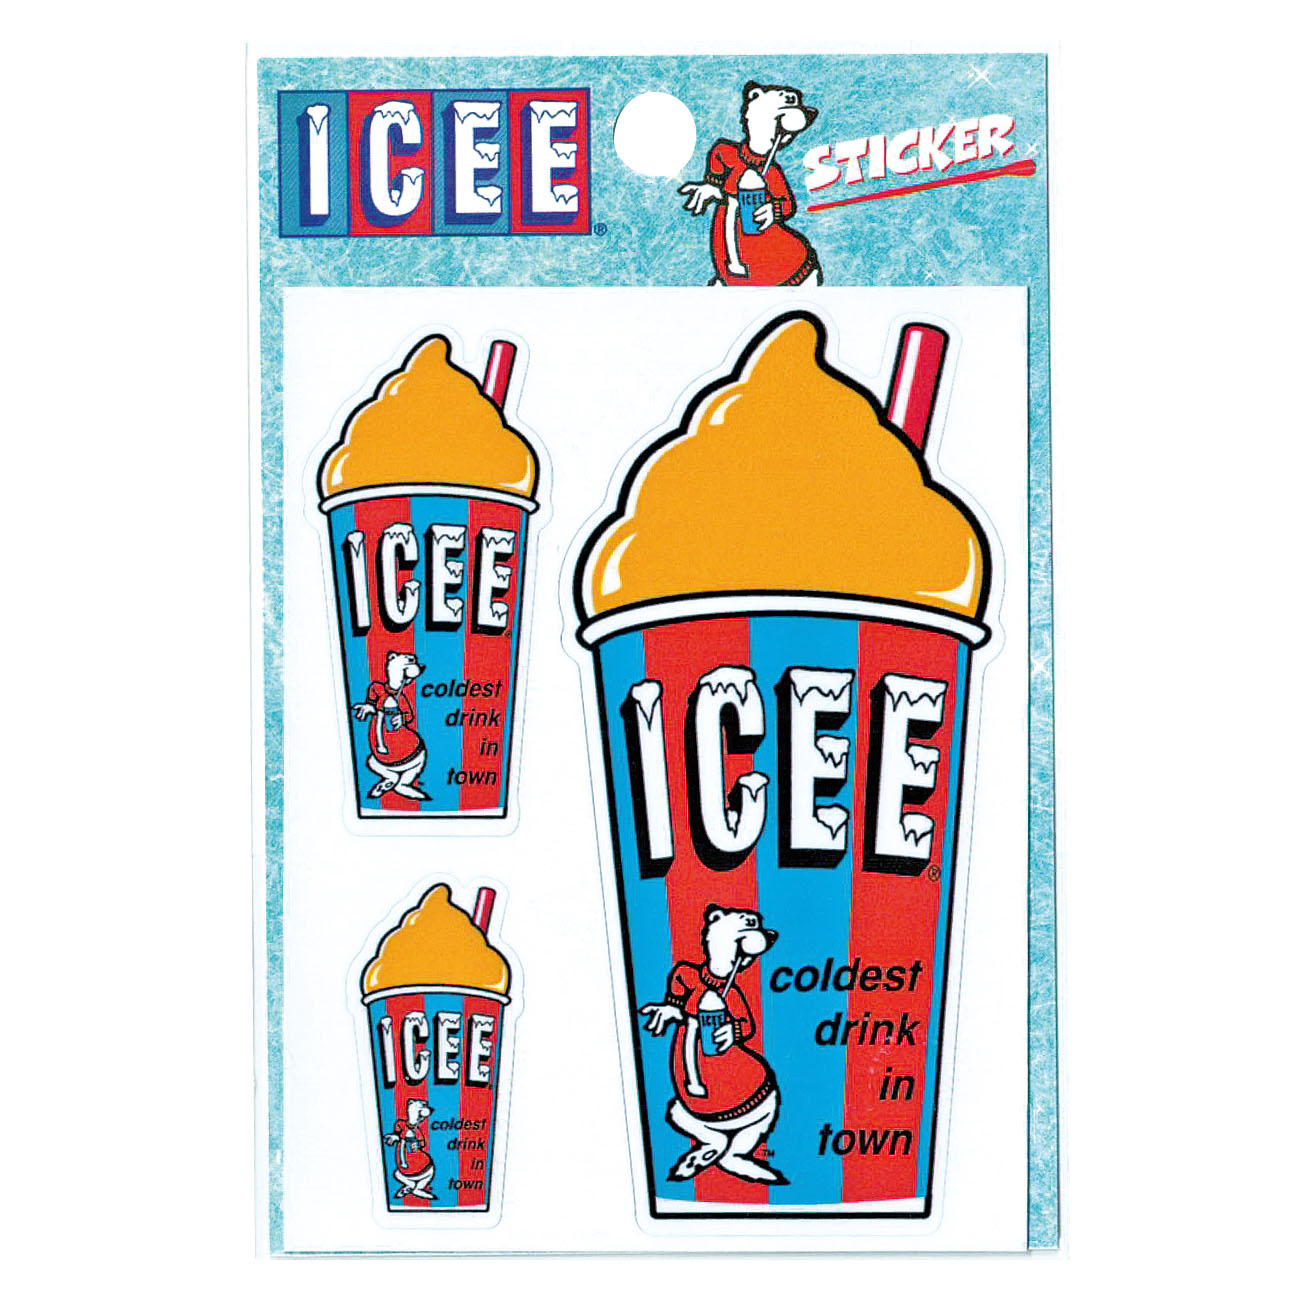 STICKER【ICEE CUP OR】